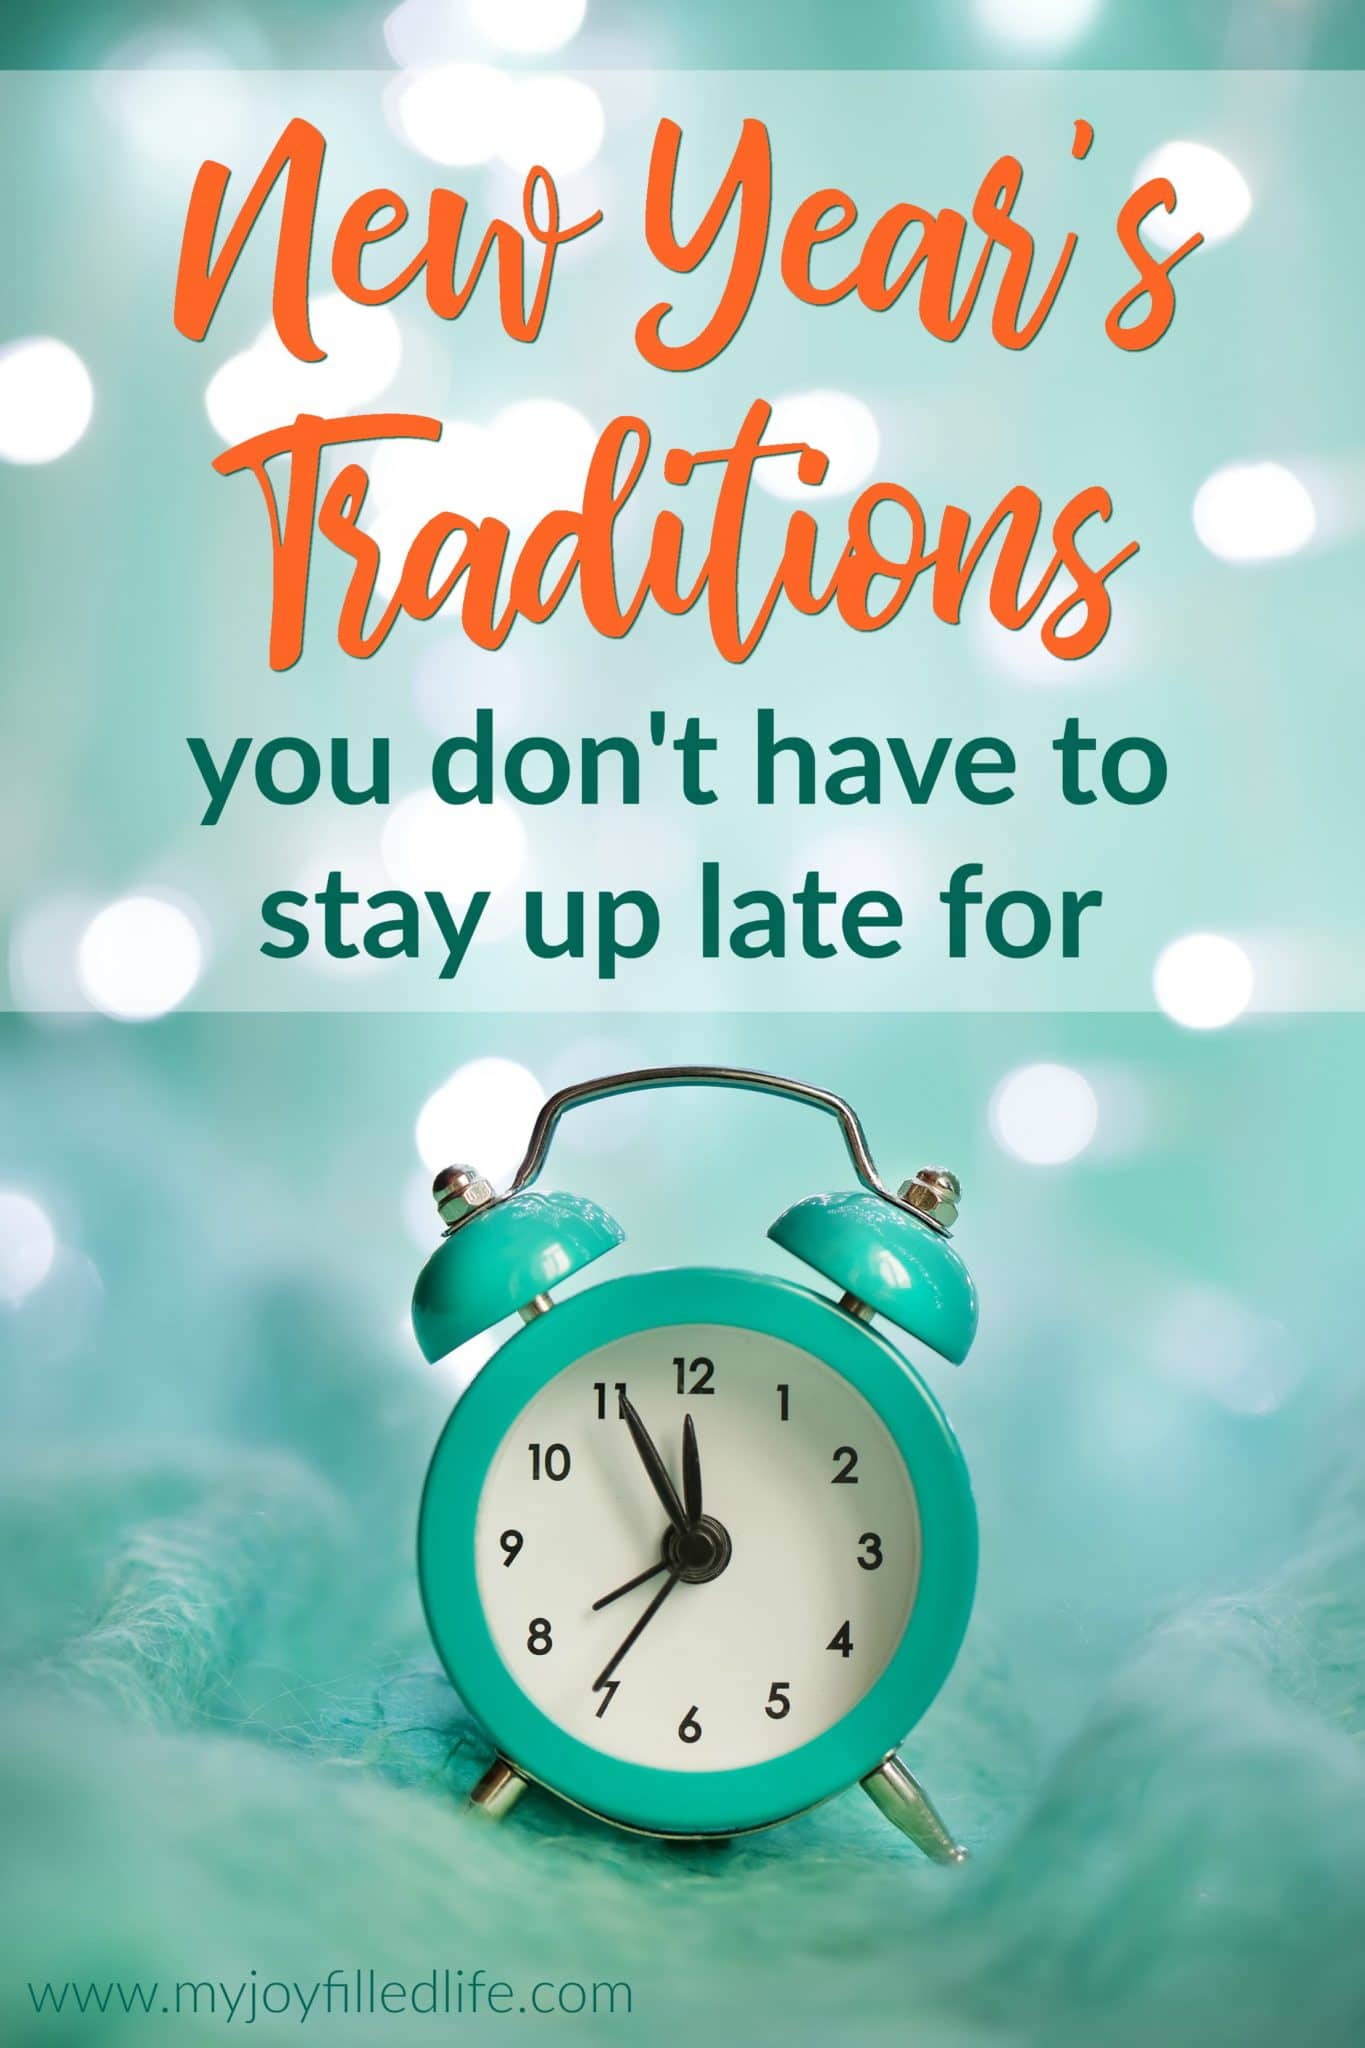 If you prefer not to stay up light for New Year's Eve, here are some other traditions to consider doing with your family. #newyears #newyeartraditions